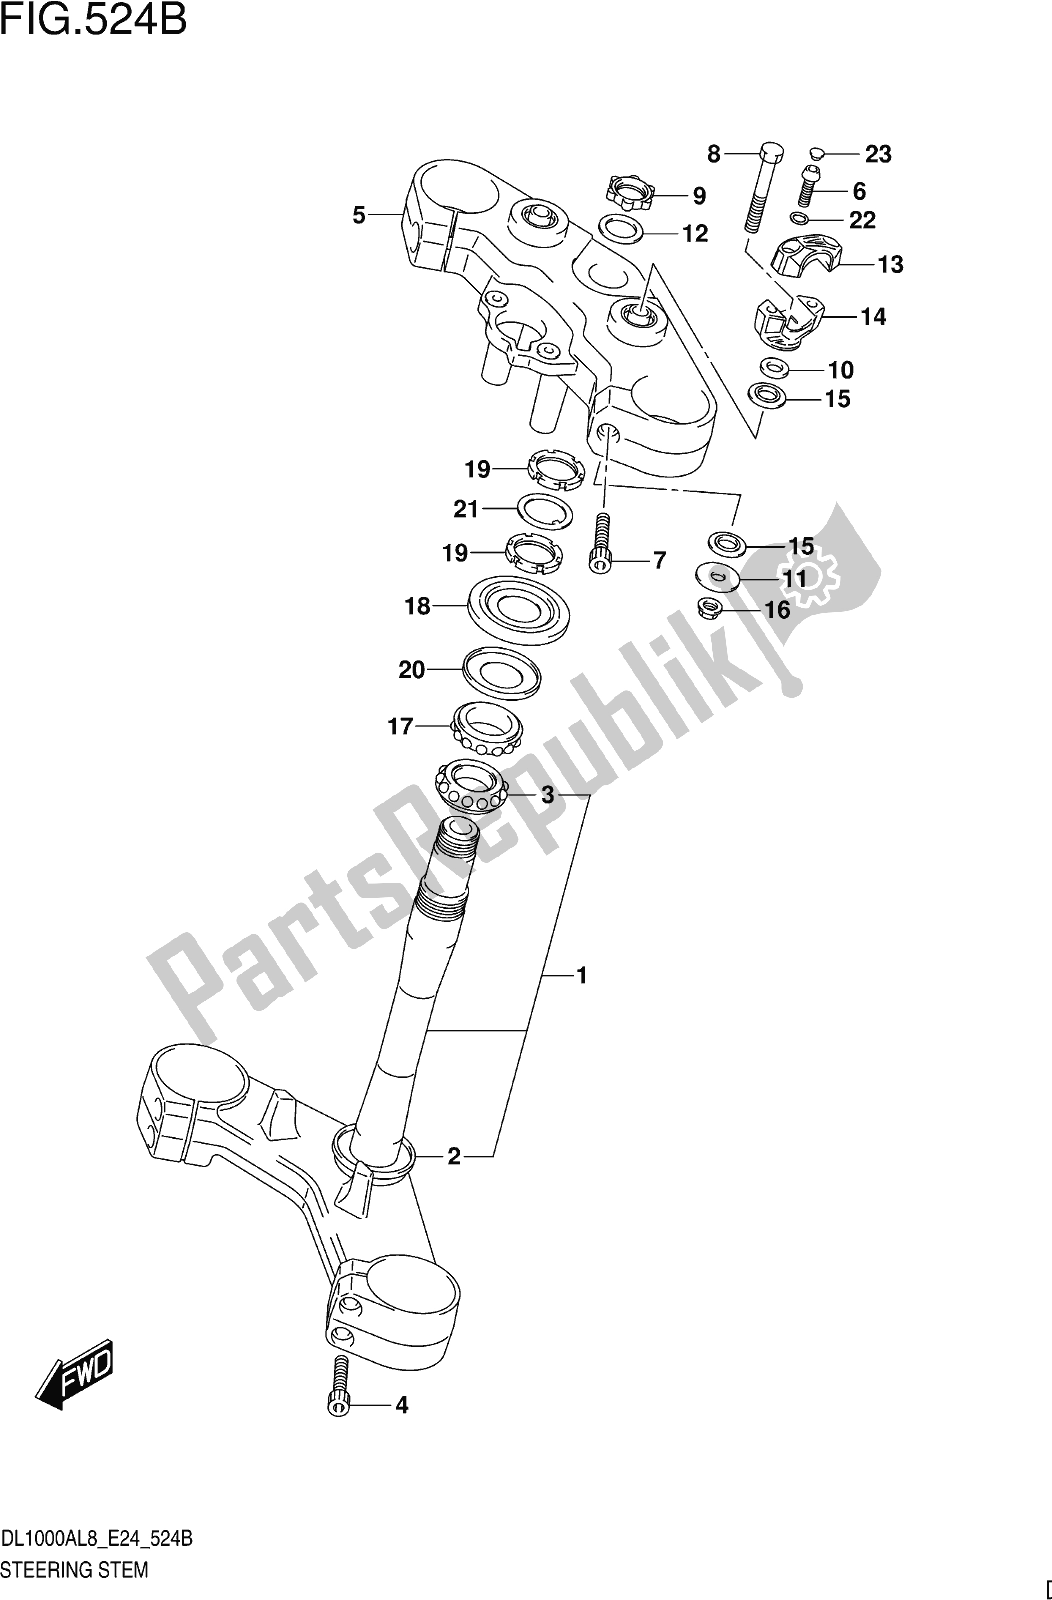 All parts for the Fig. 524b Steering Stem (dl1000xal8 E24) of the Suzuki DL 1000 XA 2018